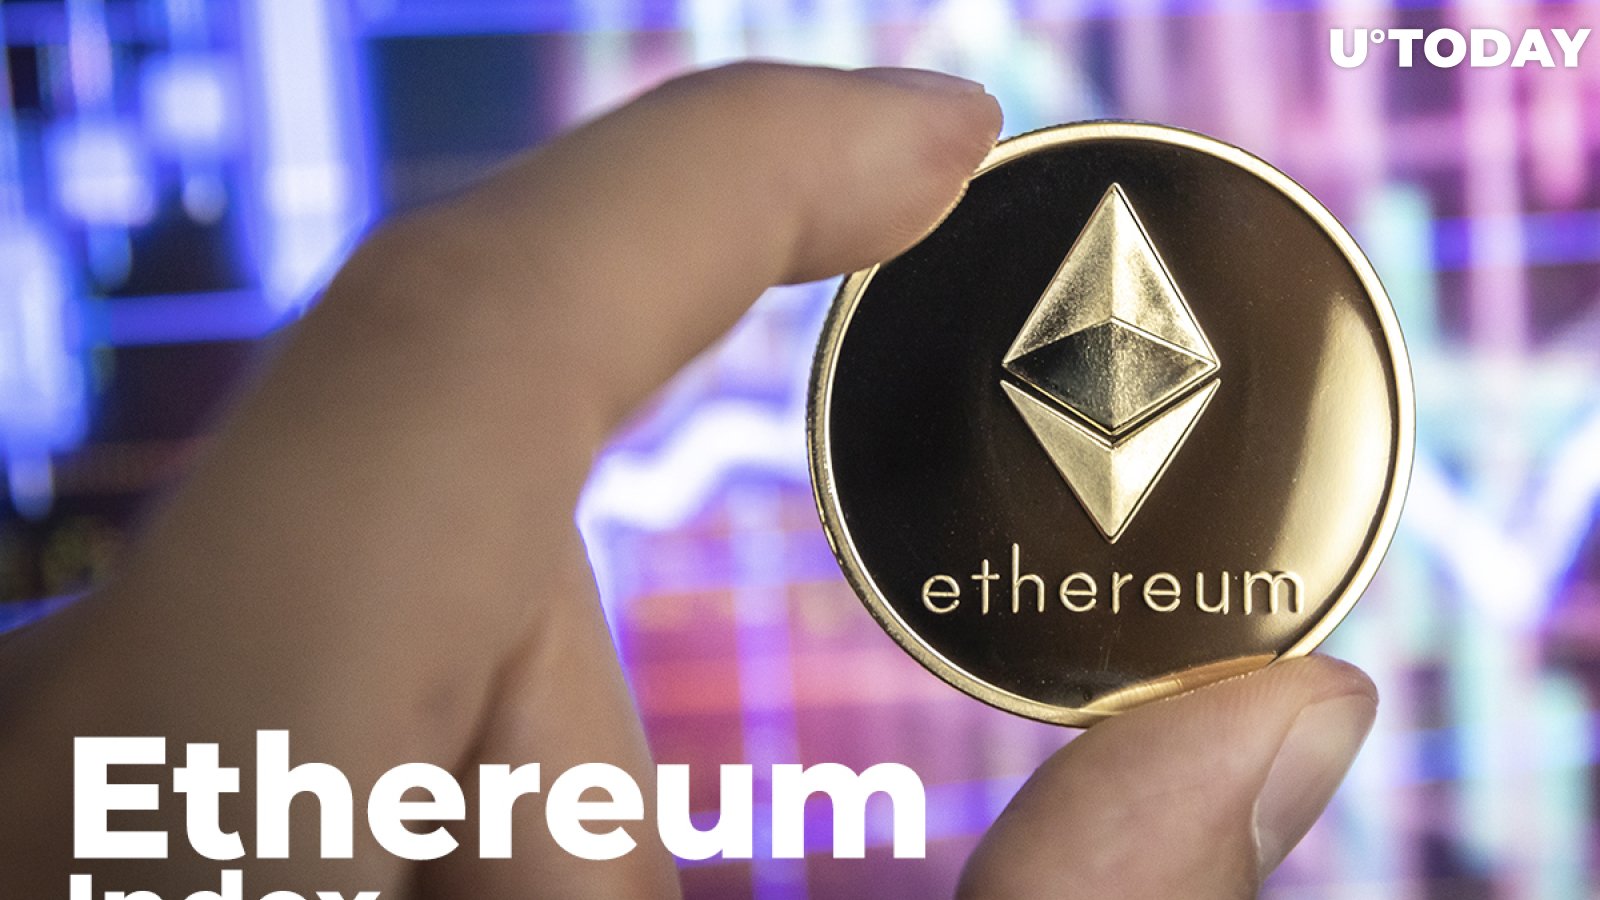 Ethereum Index Flashes "Greed" as ETH Price Begins Rising